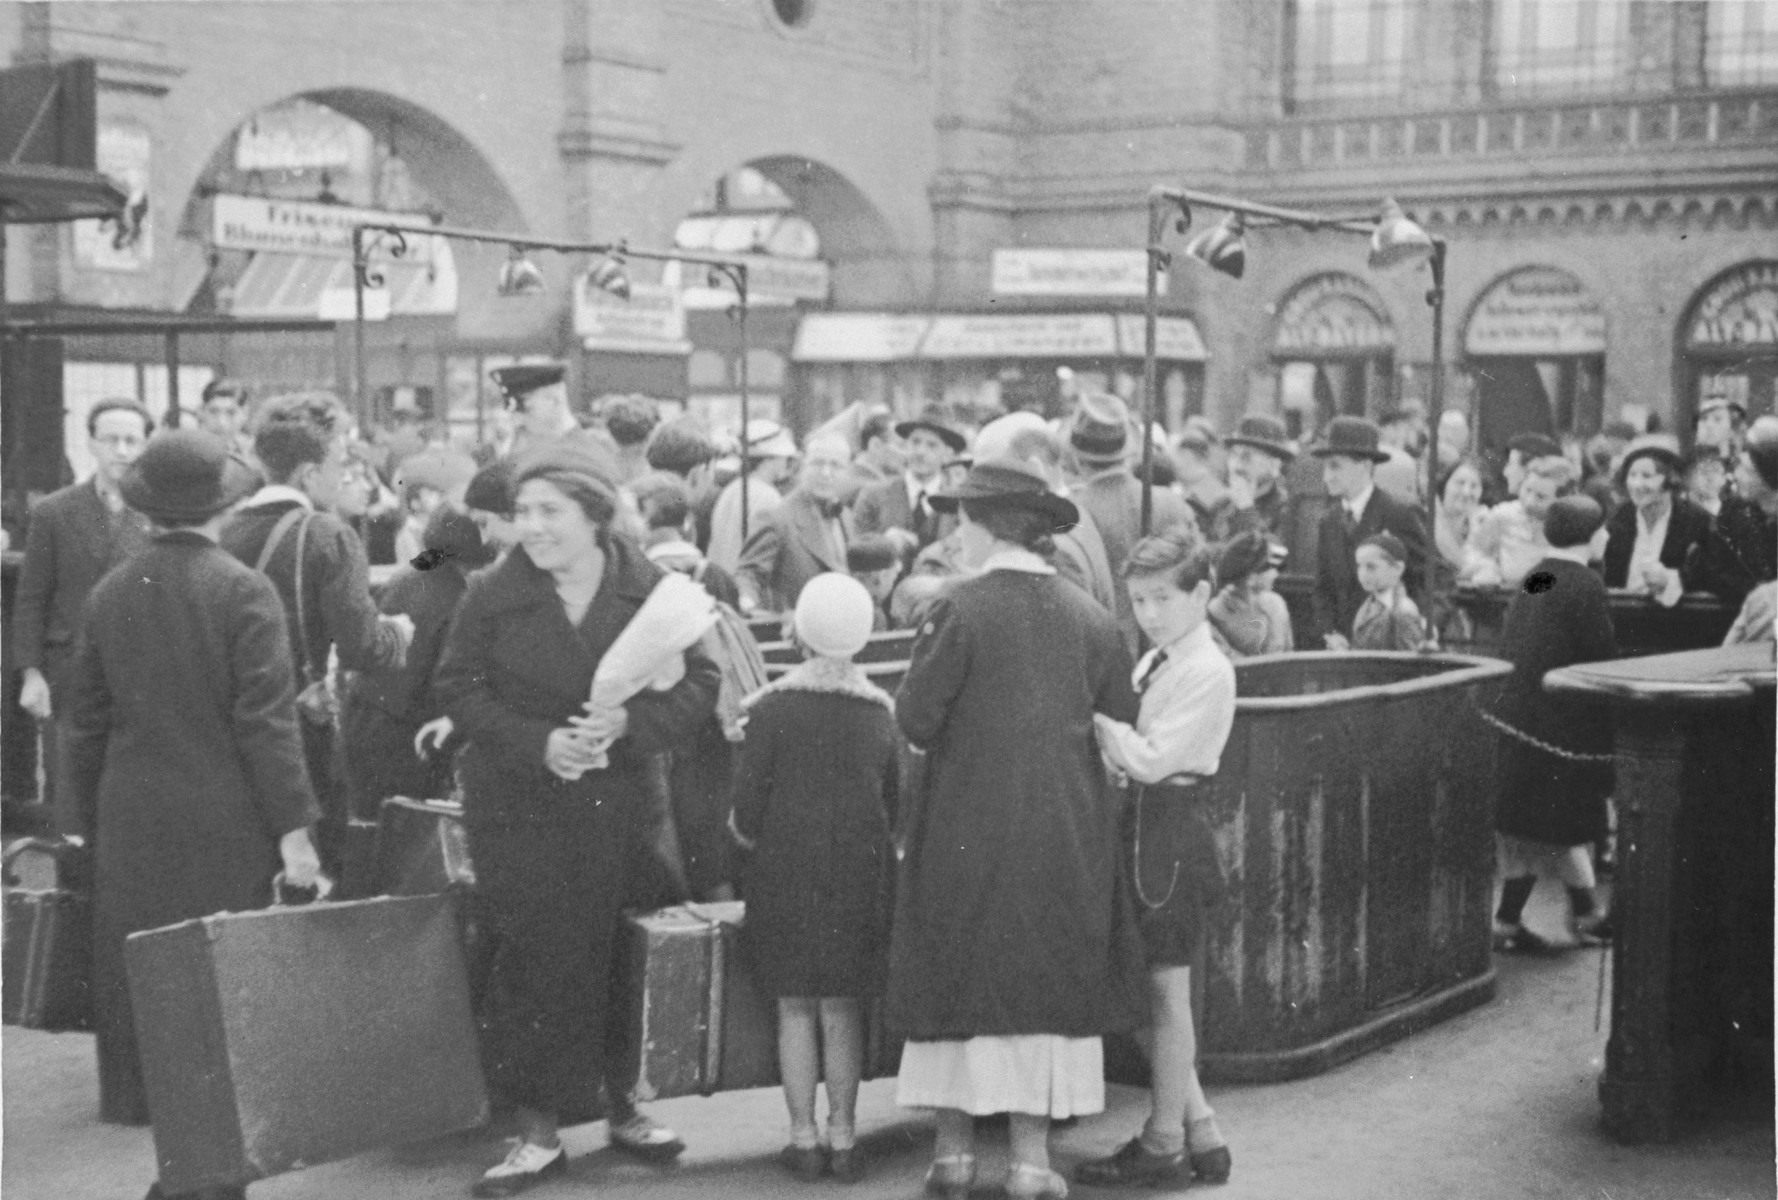 A group of Jewish children from Germany are reunited with their families at the train station in Berlin after their stay at a Kinderlager [children's recreational summer camp] in Horserod, Denmark. 
 
In 1935-36 Norbert Wollheim was involved in organizing groups of German Jewish youth to attend a summer camp in Denmark.